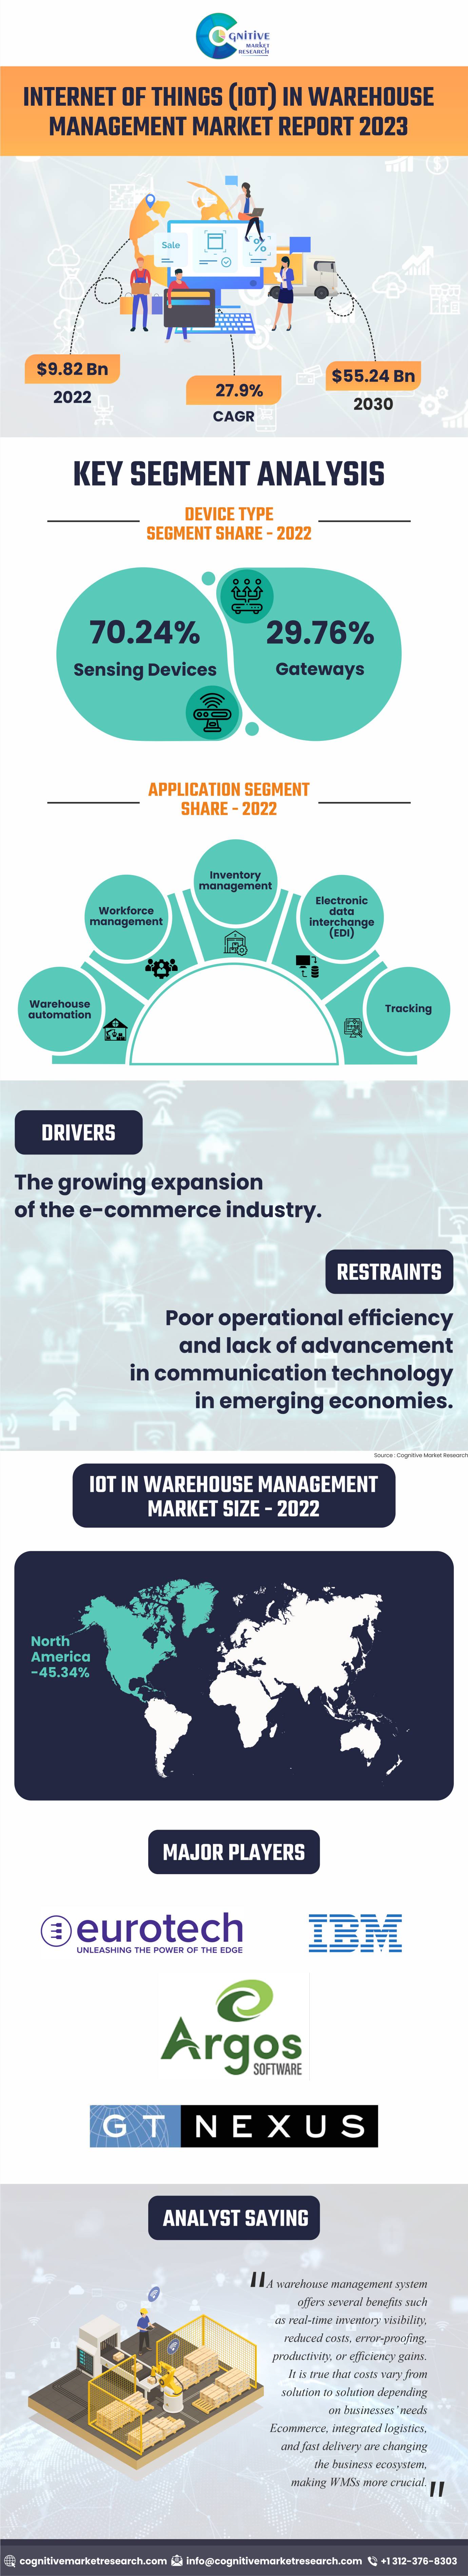 Internet of Things in Warehouse Management market size was $9.82 Billion in 2022!